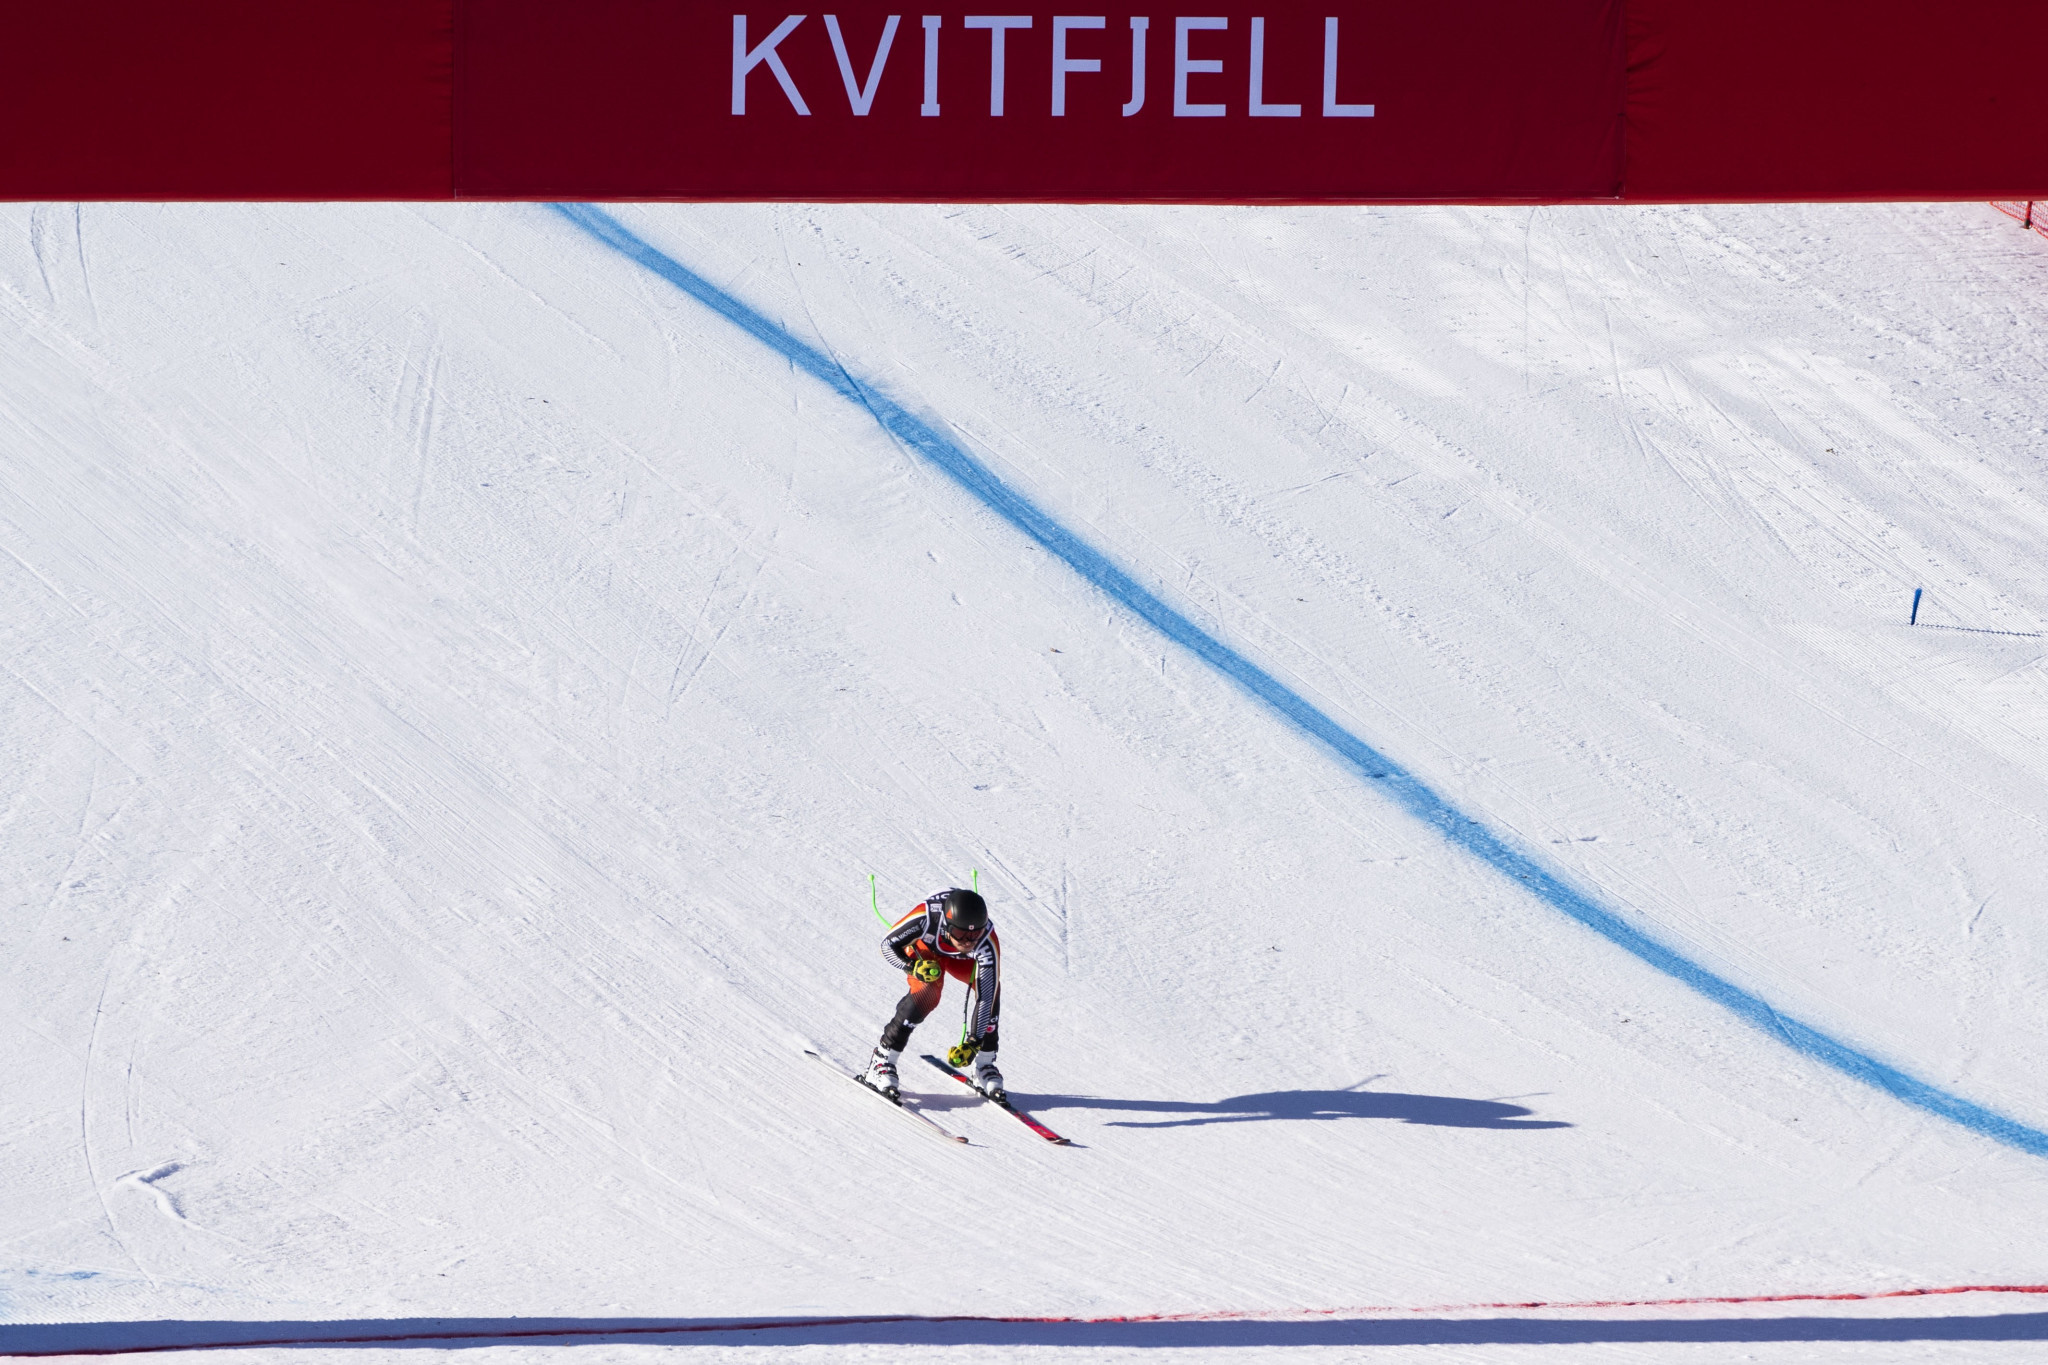 Kvitfjell is expected to hold Women's Alpine Ski World Cup races for the first time in two decades next season ©Getty Images